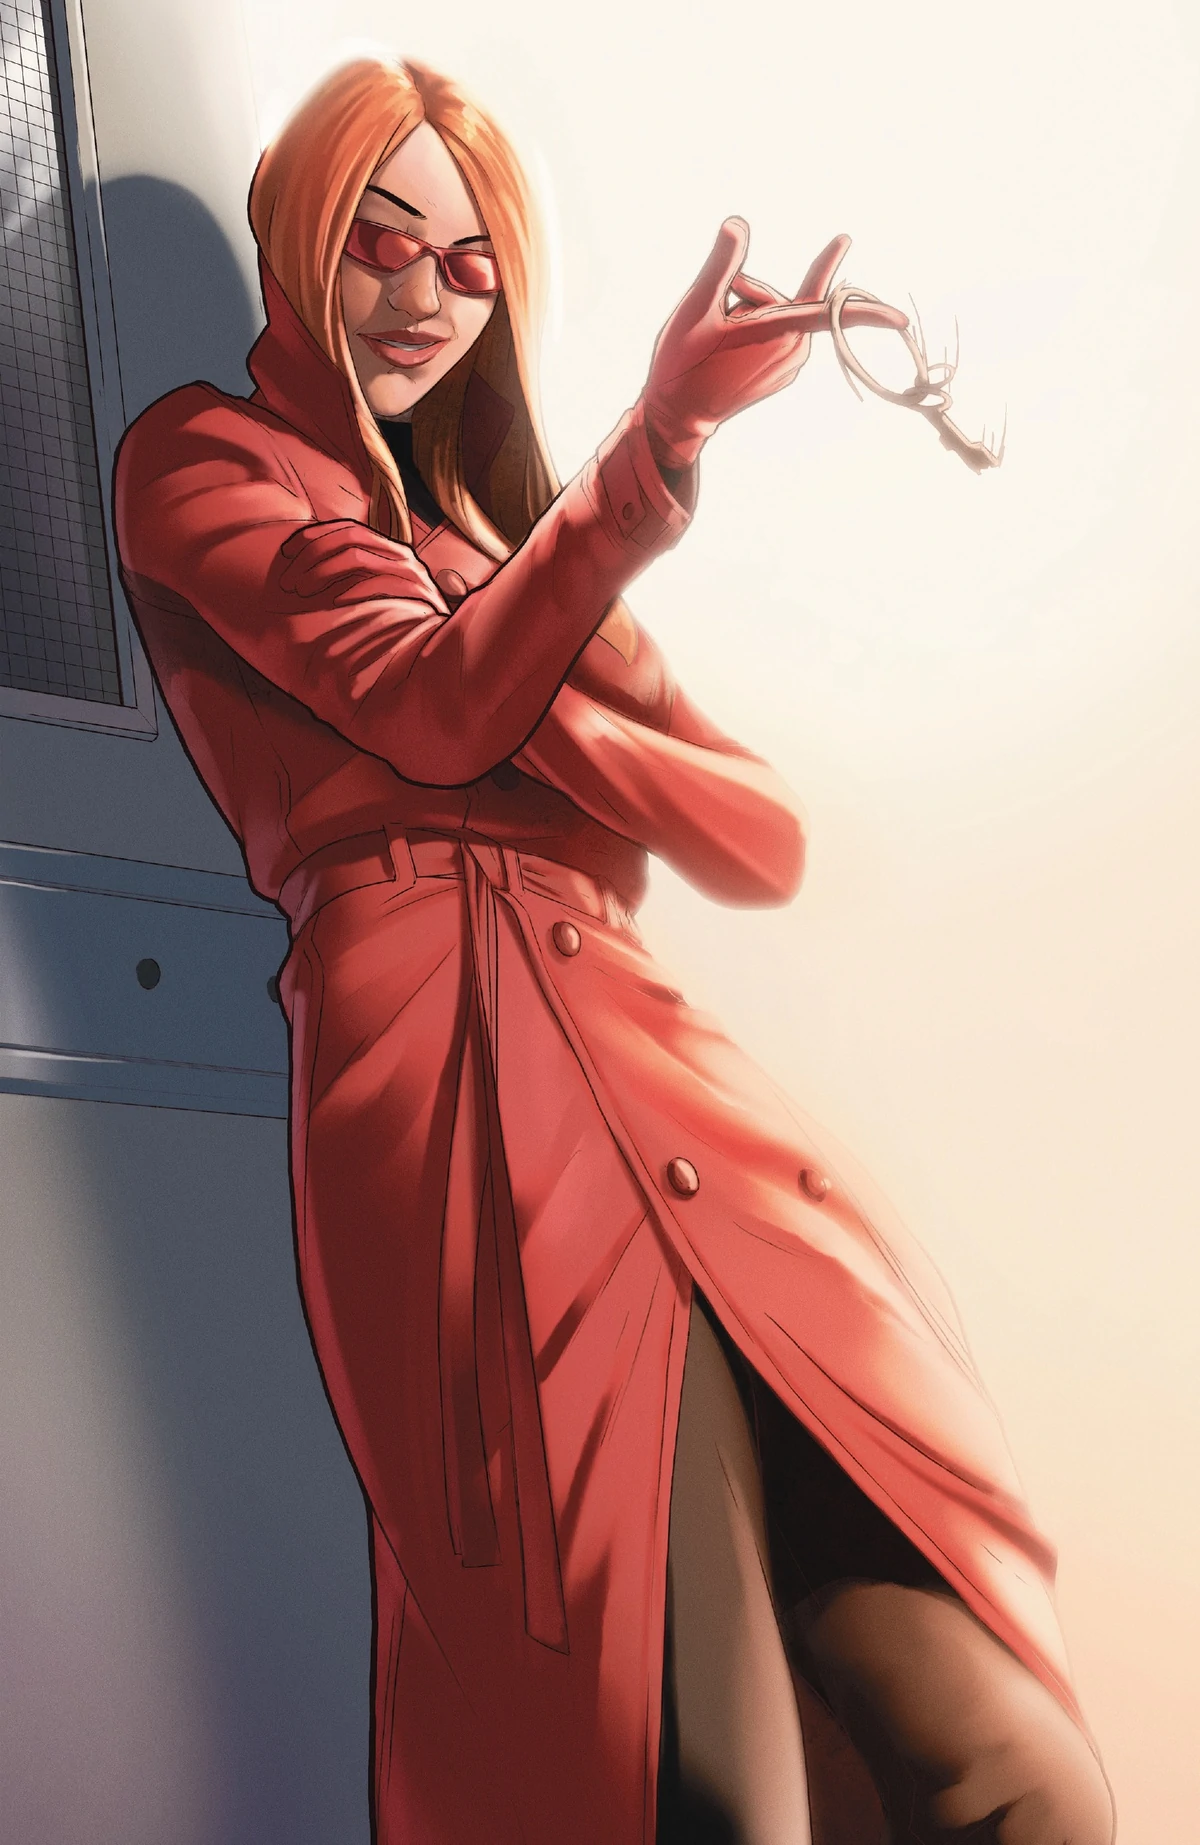 Who is Julia Carpenter, and what was her role as Madame Web